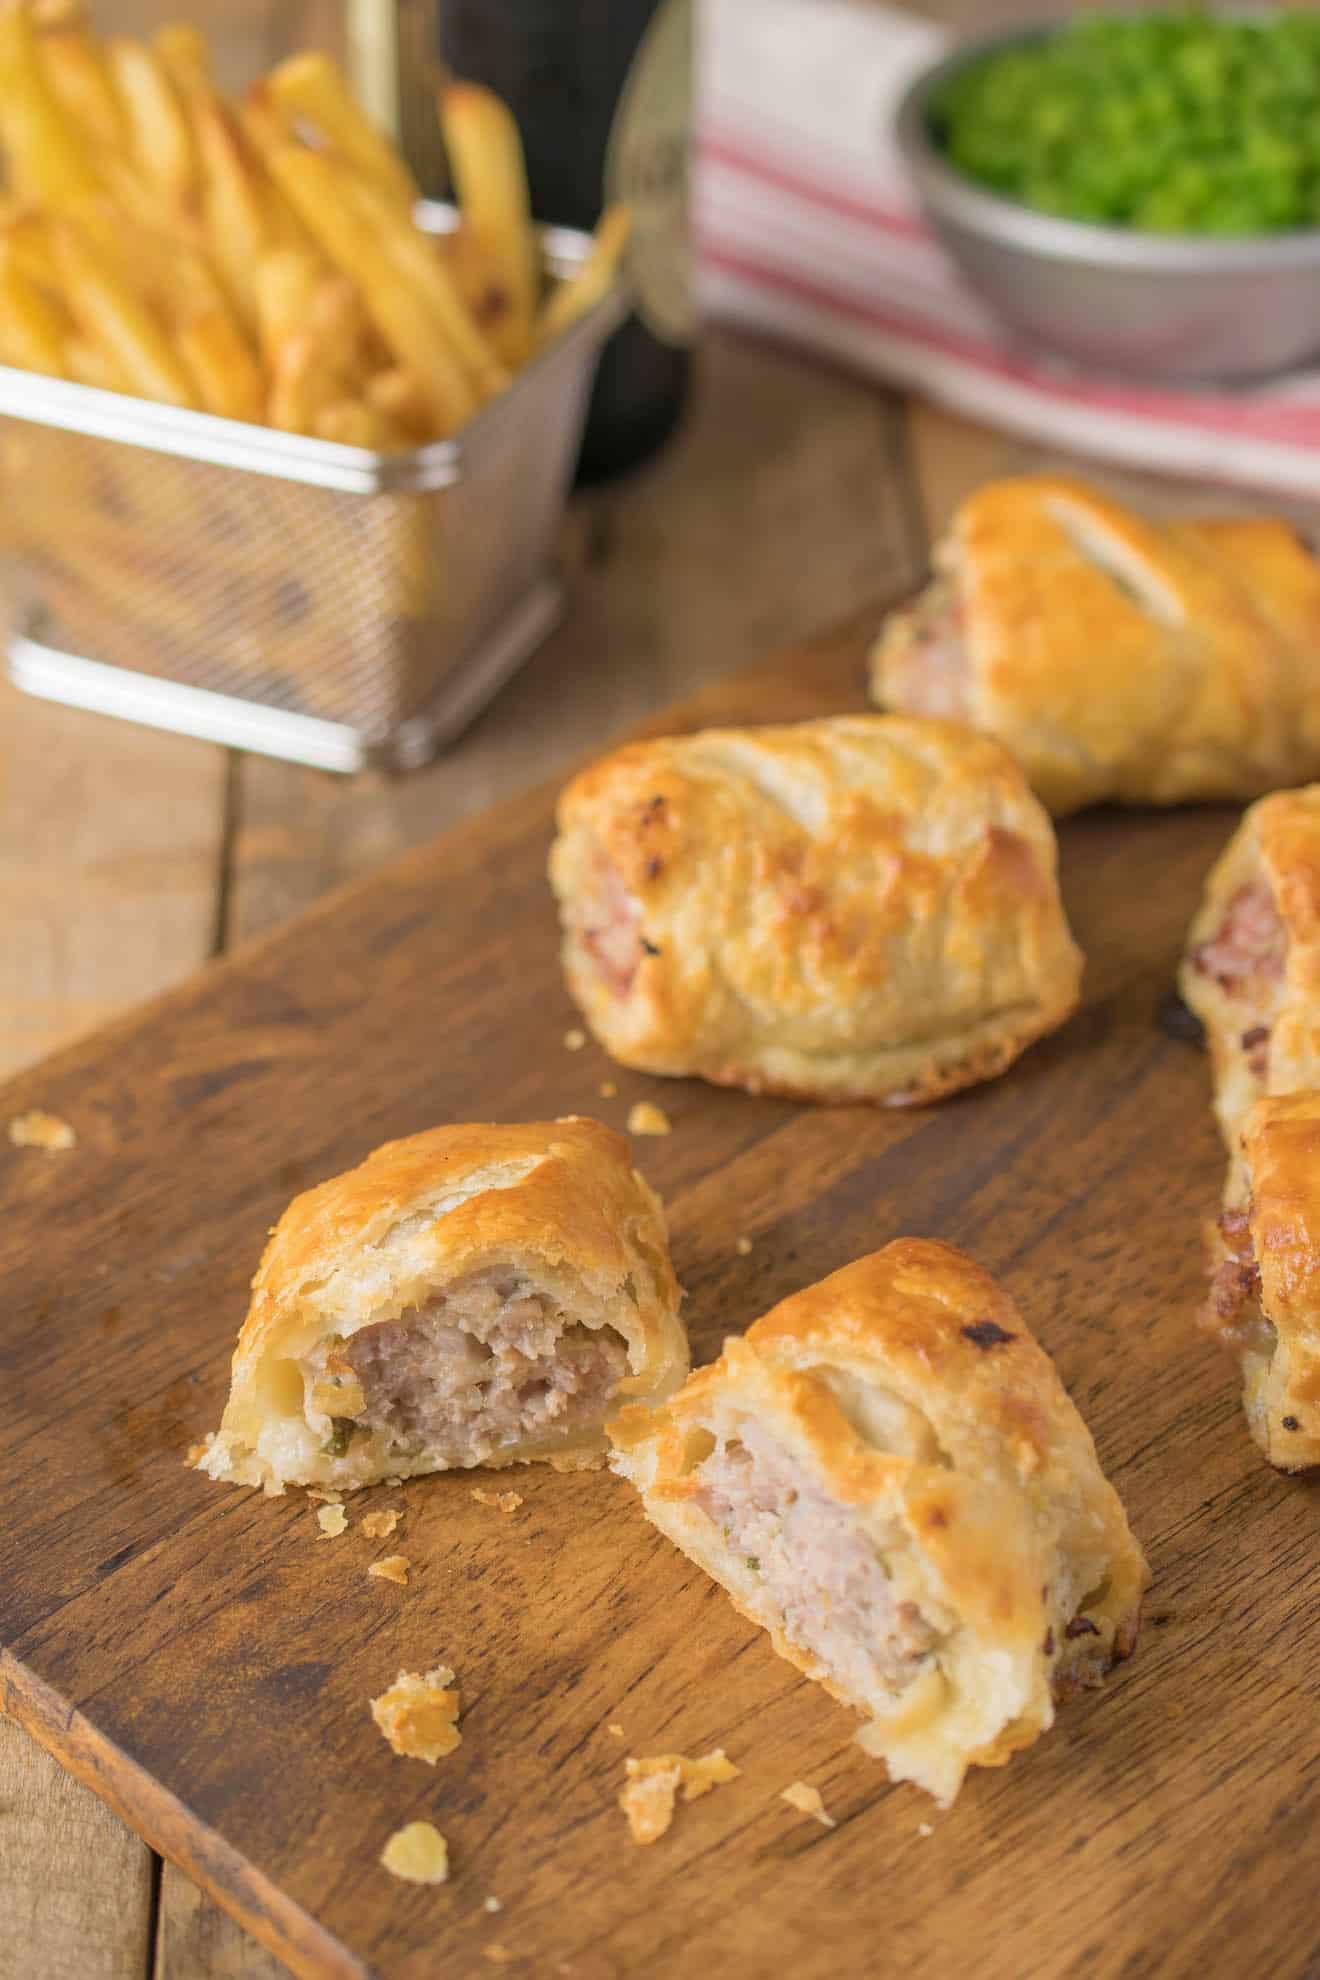 Sausage rolls made with gluten free dough